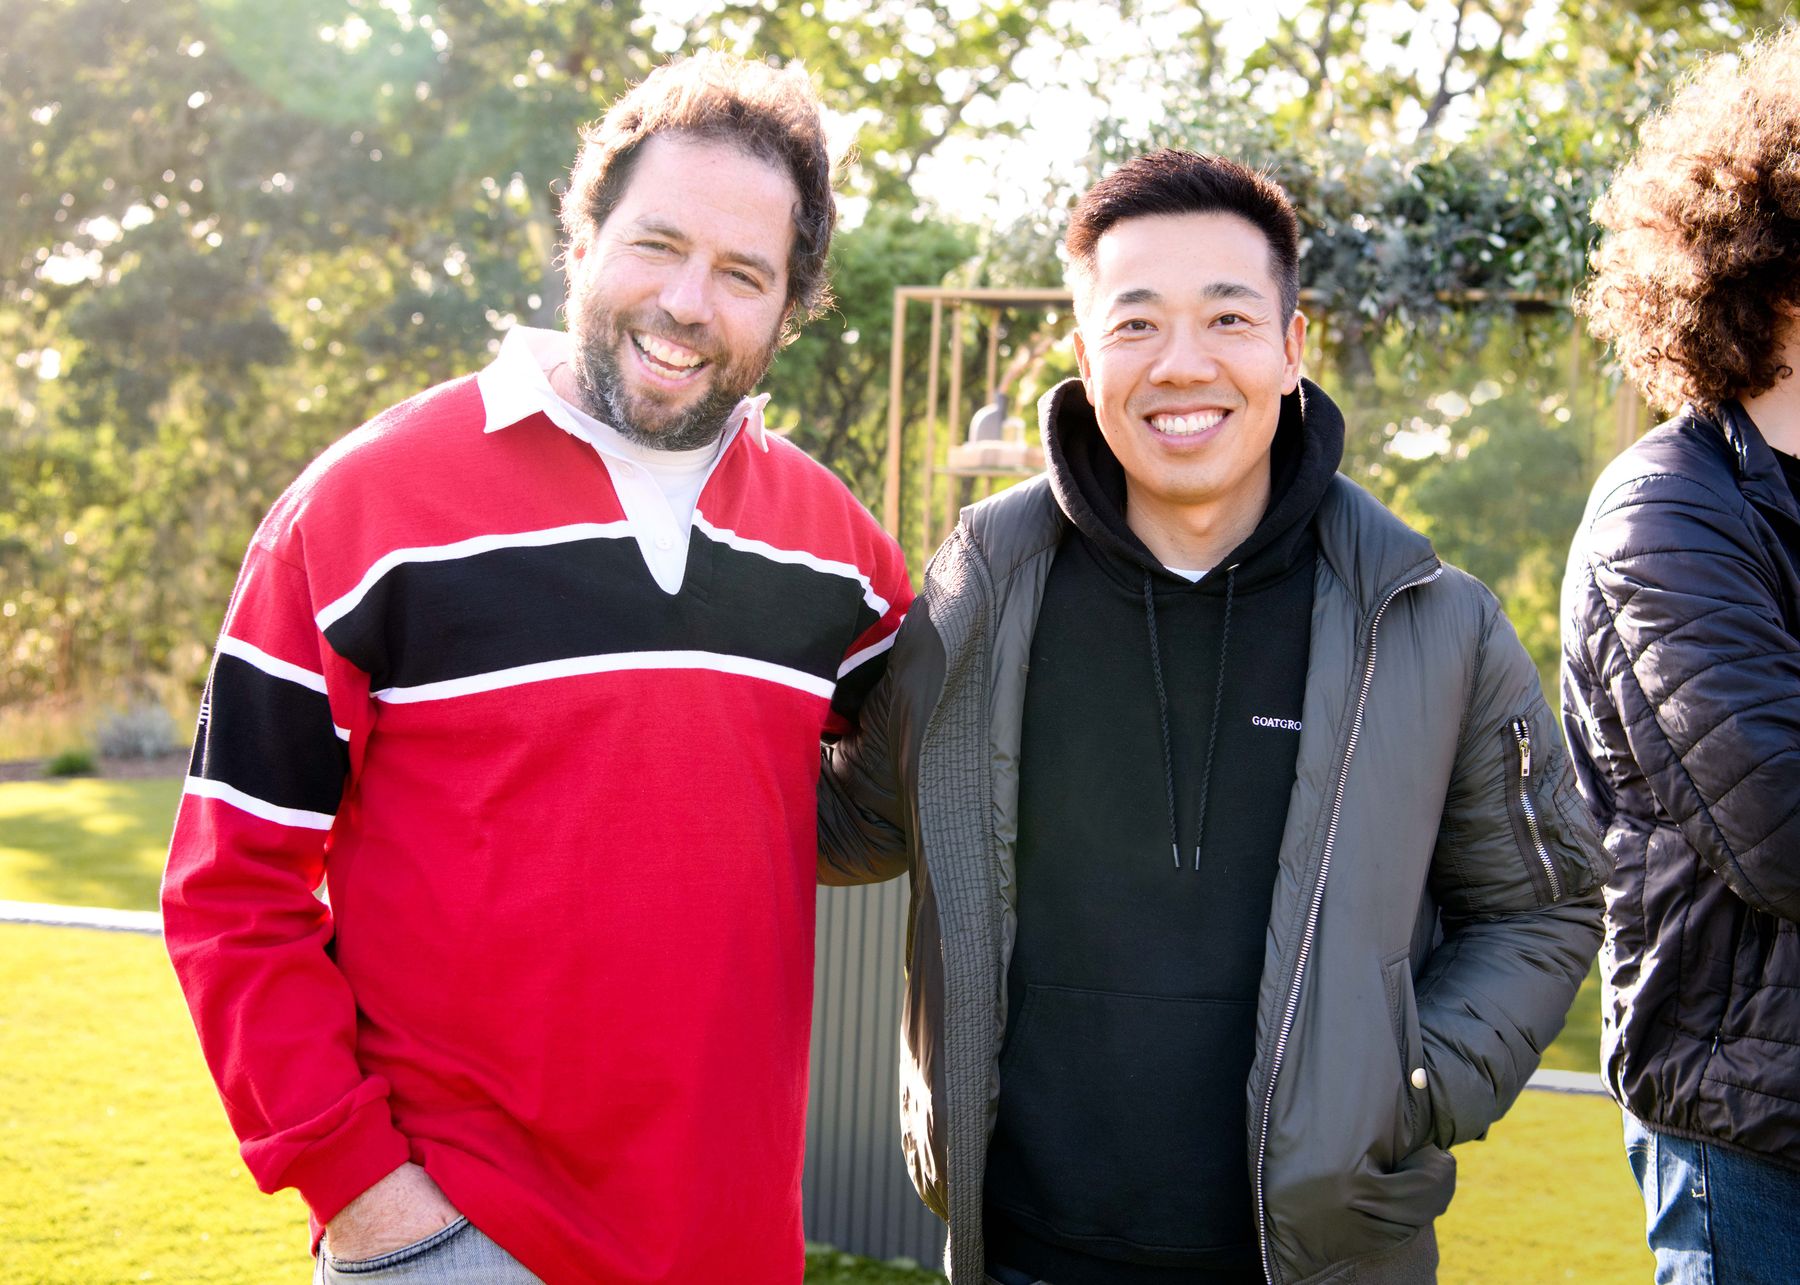 Danny Rimer (left) with GOAT Co-founder &amp; CEO Eddy Lu.